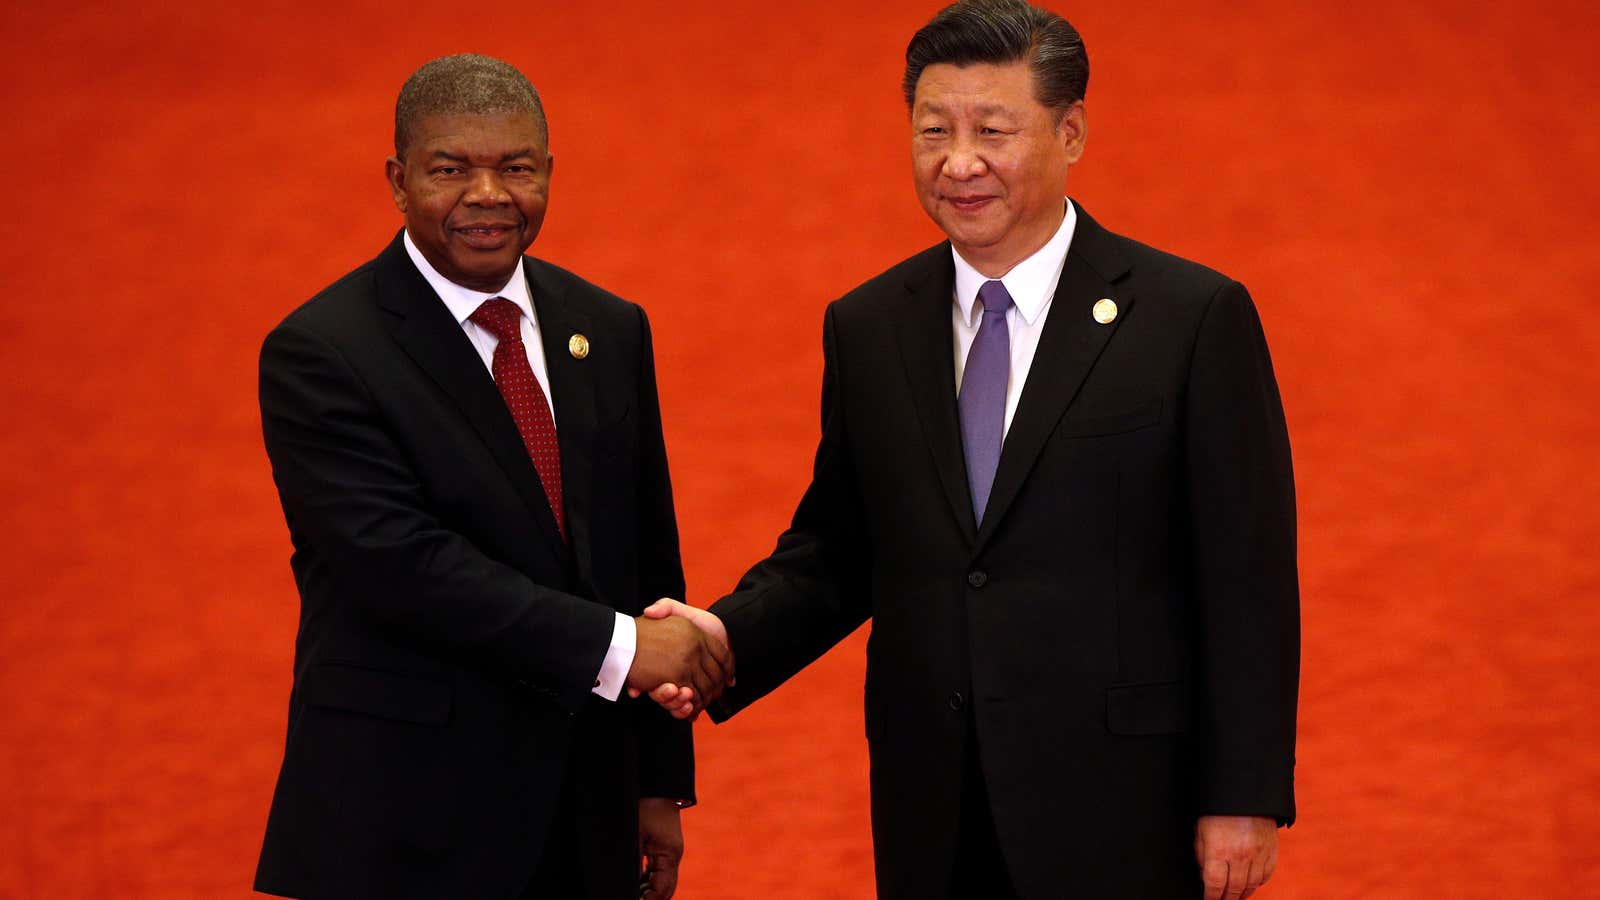 Angola’s President Joao Lourenco, left, shakes hands with Chinese President Xi Jinping during the Forum on China-Africa Cooperation in Beijing September 3, 2018.